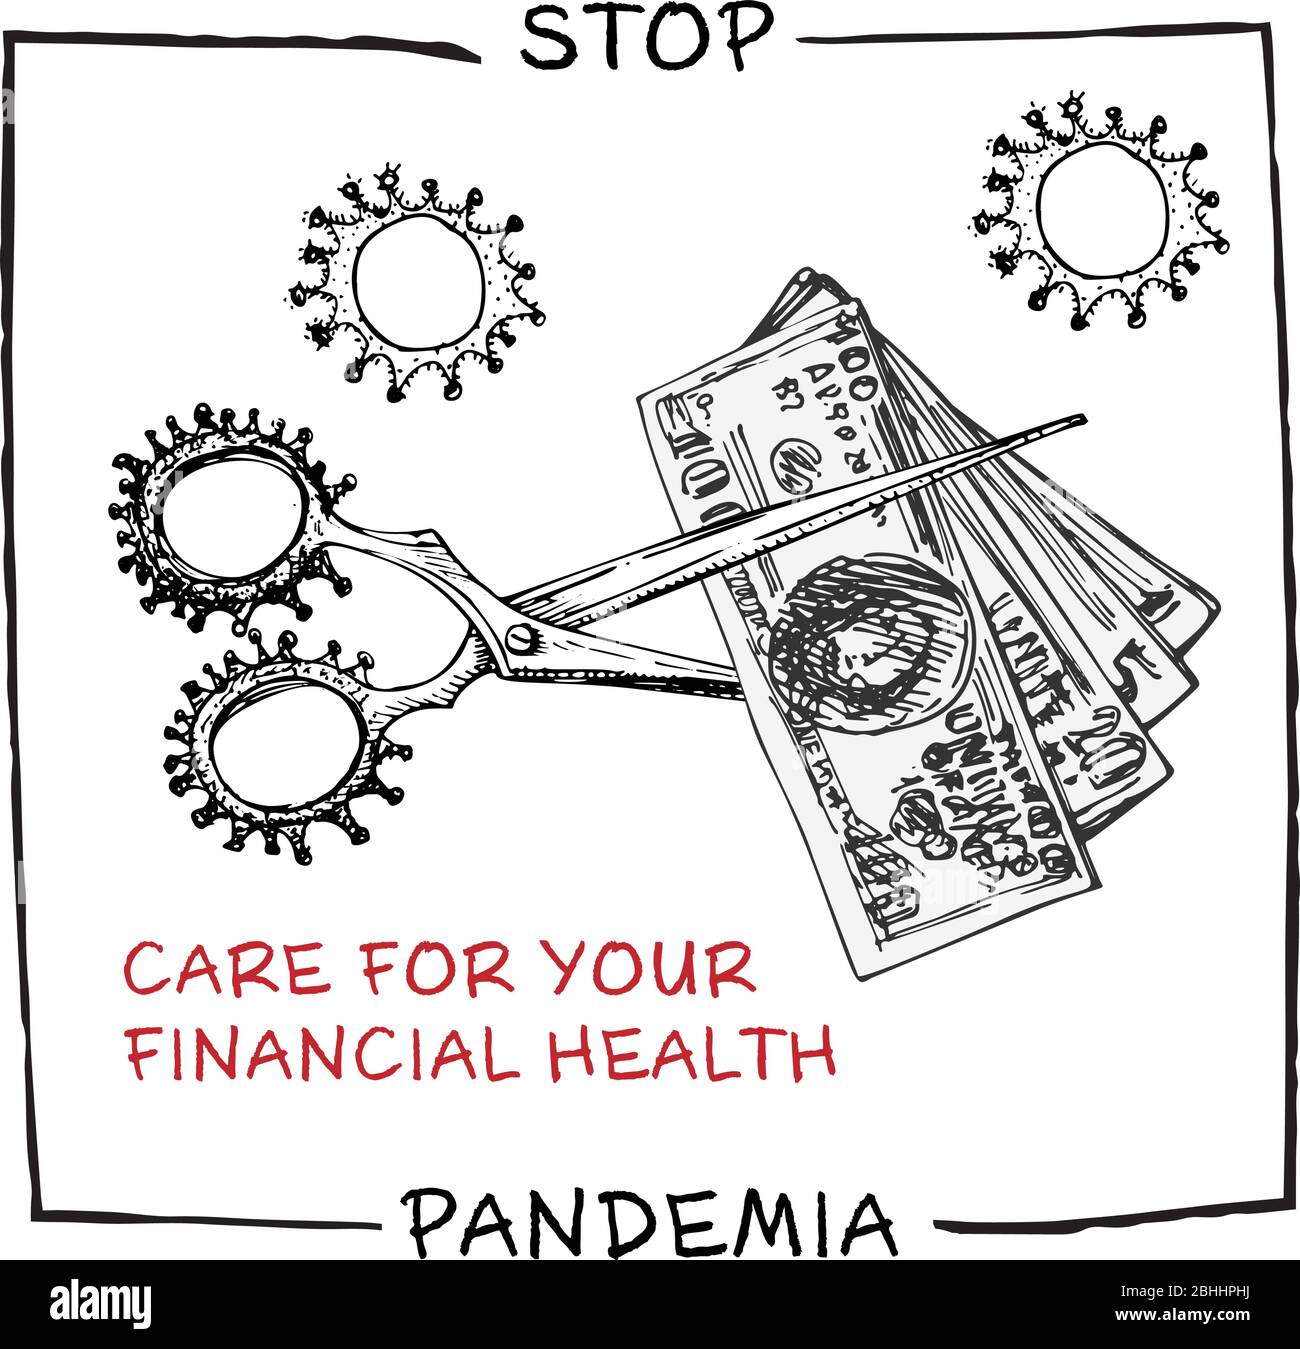 Design concept of economic and financial information agitational poster against coronavirus epidemic with text Stop pandemia Keep your finance healthy Stock Vector